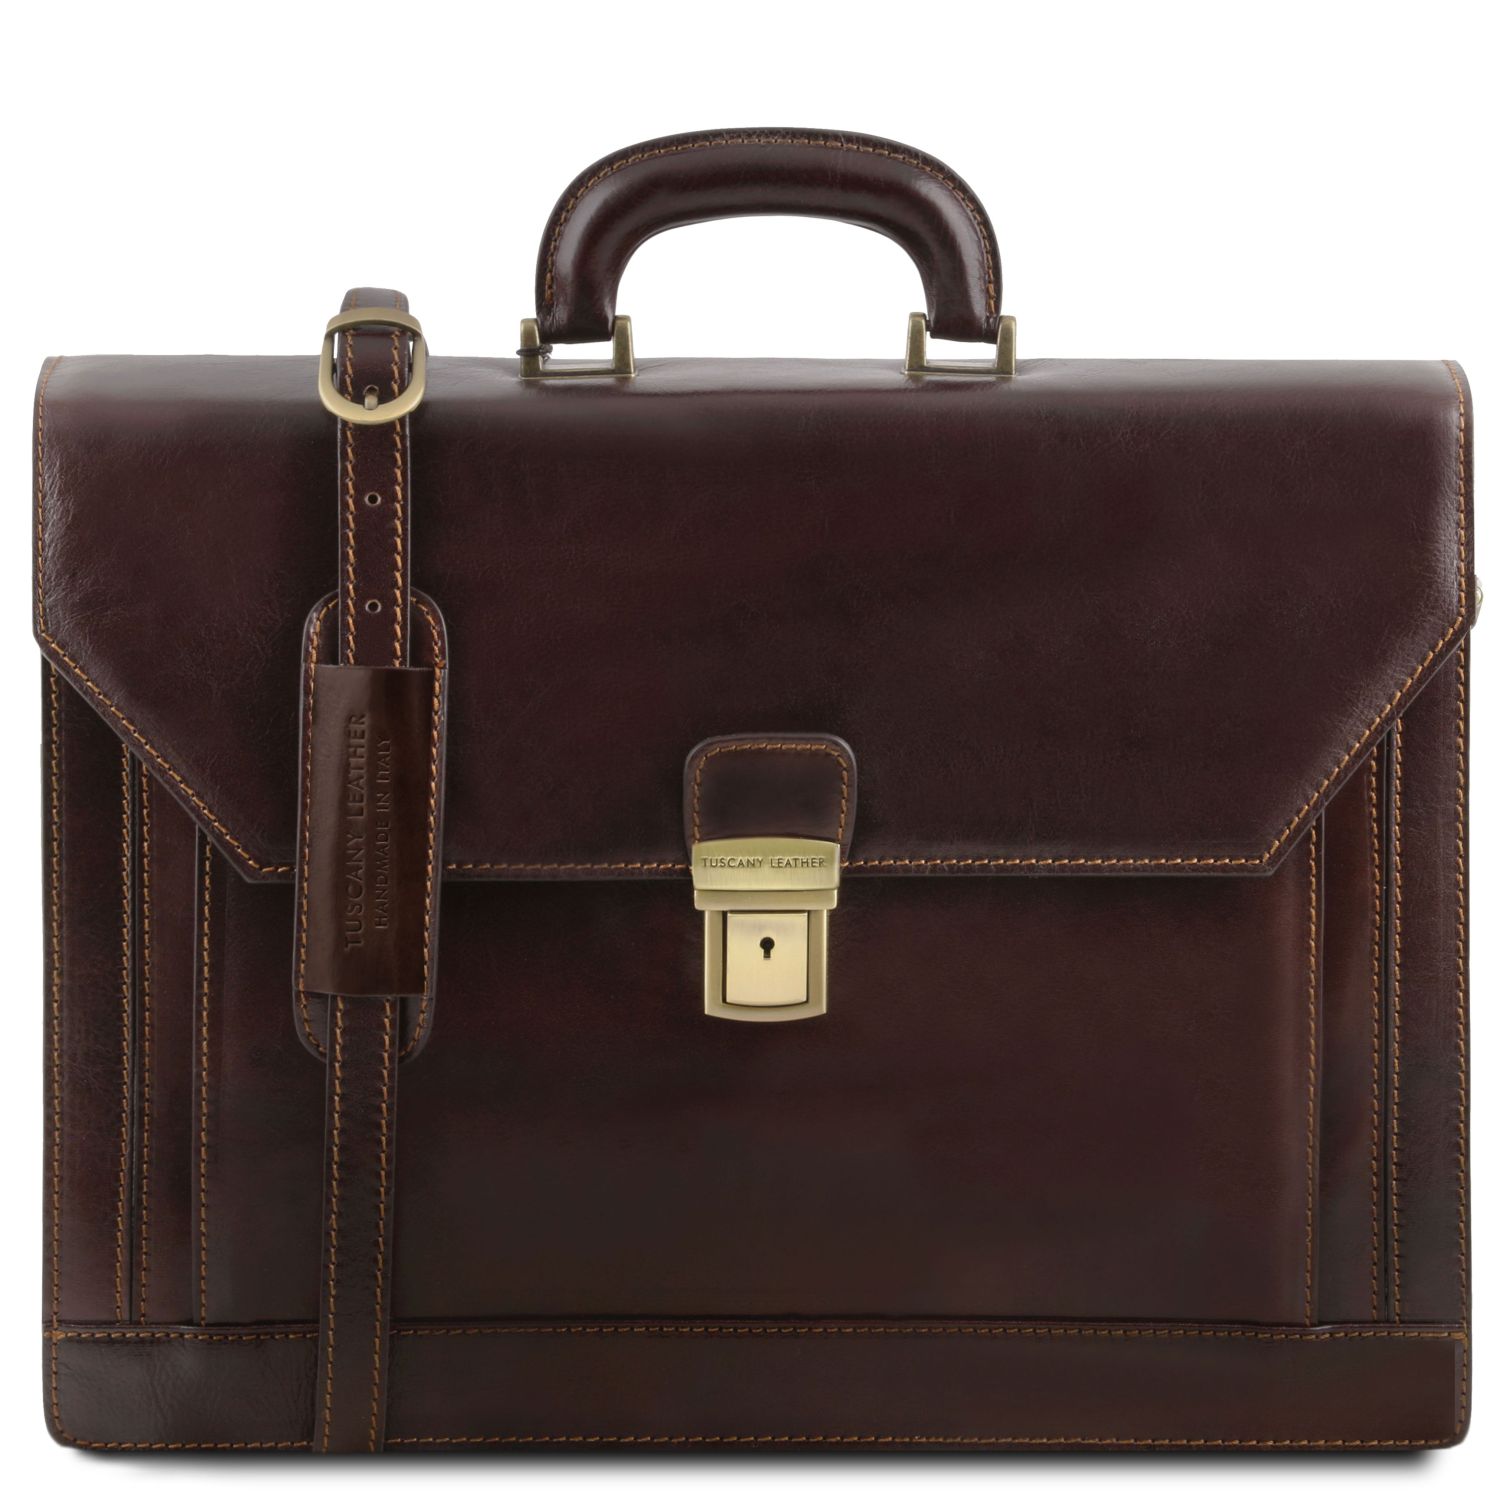 Italian Leather Briefcase for Men in Saffiano Leather Best 